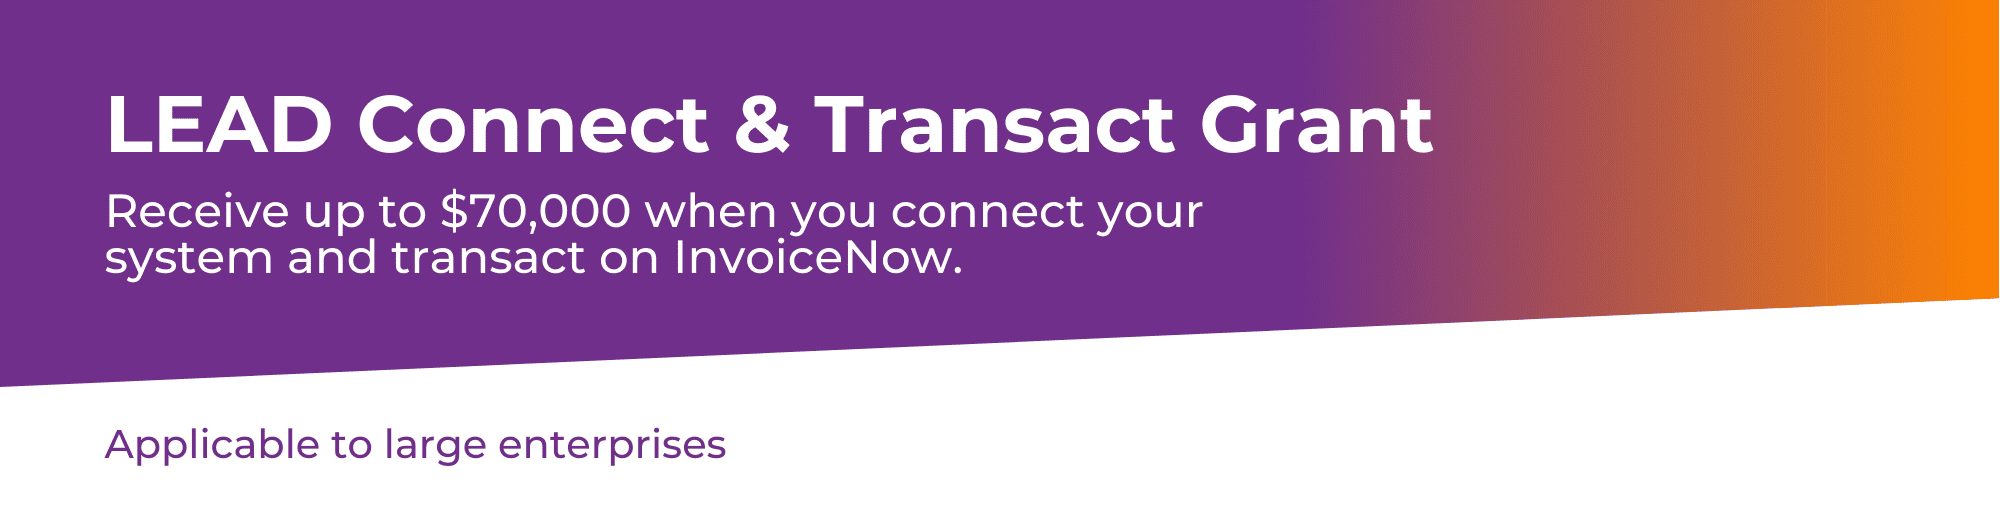 LEAD Connect Transact Grant- Receive Up to 70,000 SGD when you connect your system and transact on InvoiceNow